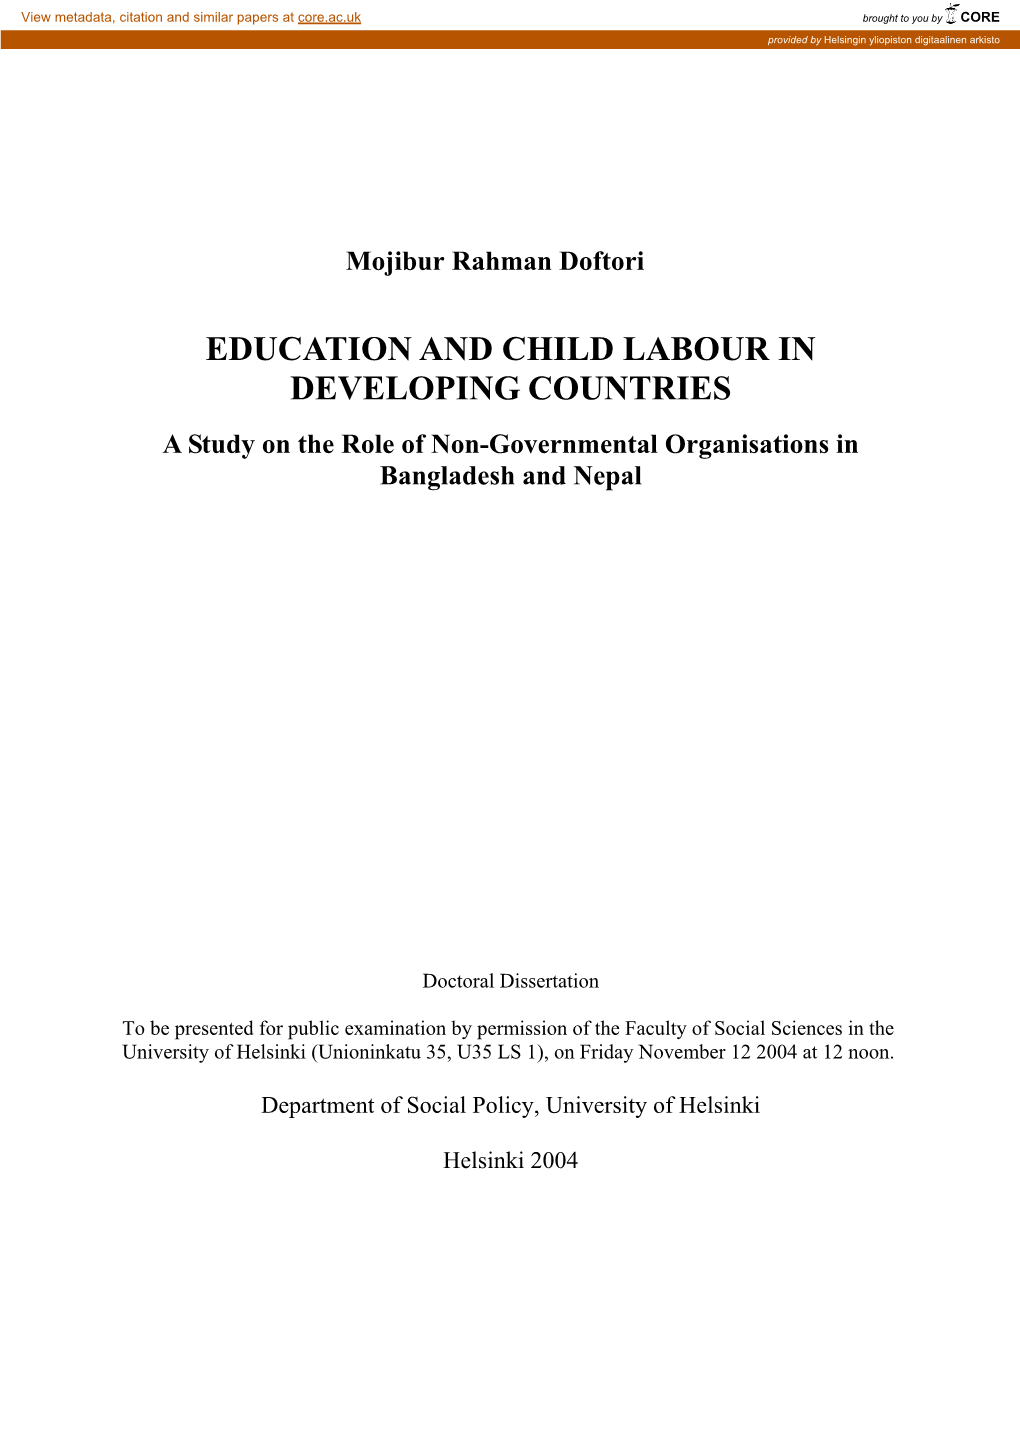 EDUCATION and CHILD LABOUR in DEVELOPING COUNTRIES a Study on the Role of Non-Governmental Organisations in Bangladesh and Nepal